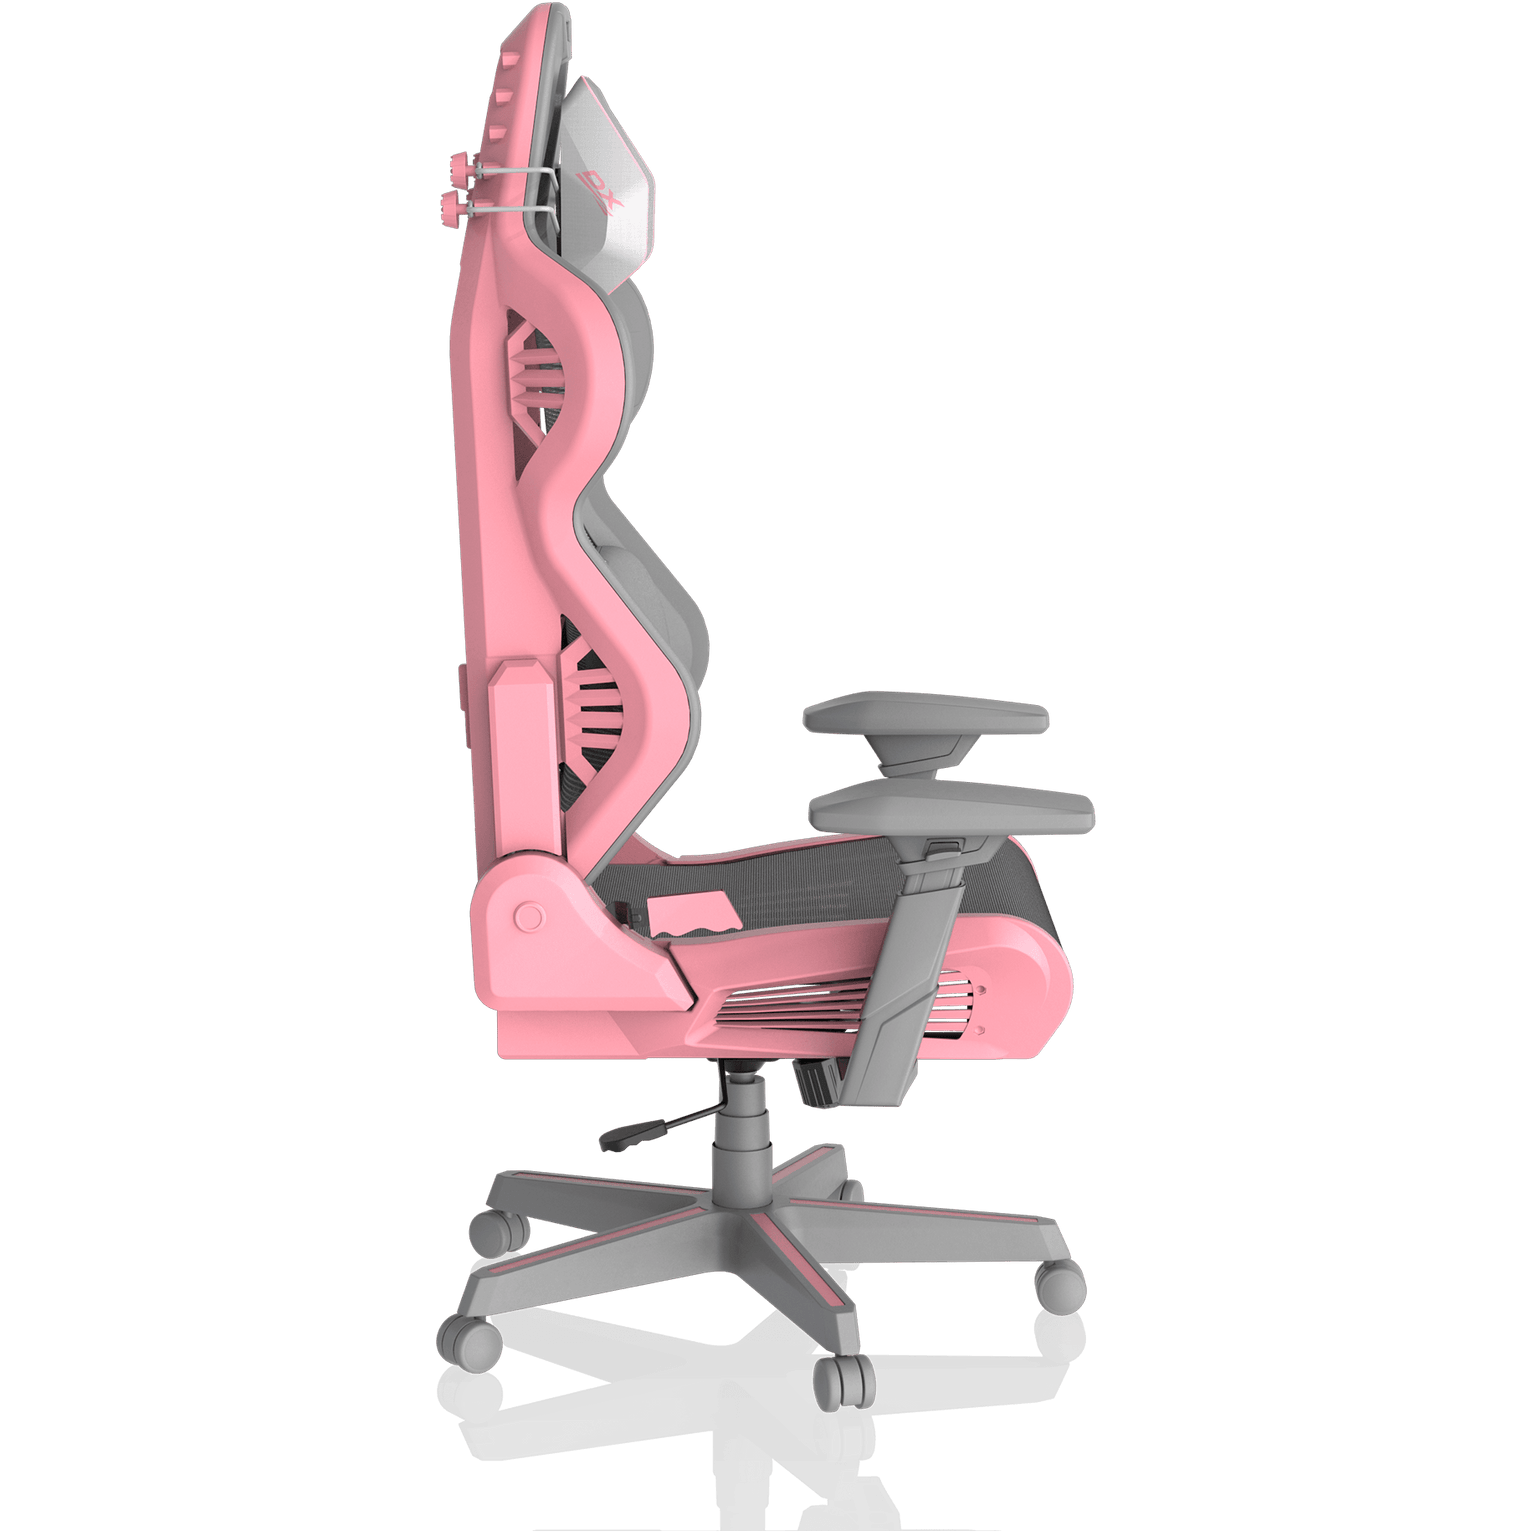 DXRacer Air Pro Mesh Pink and Grey Gaming Chair